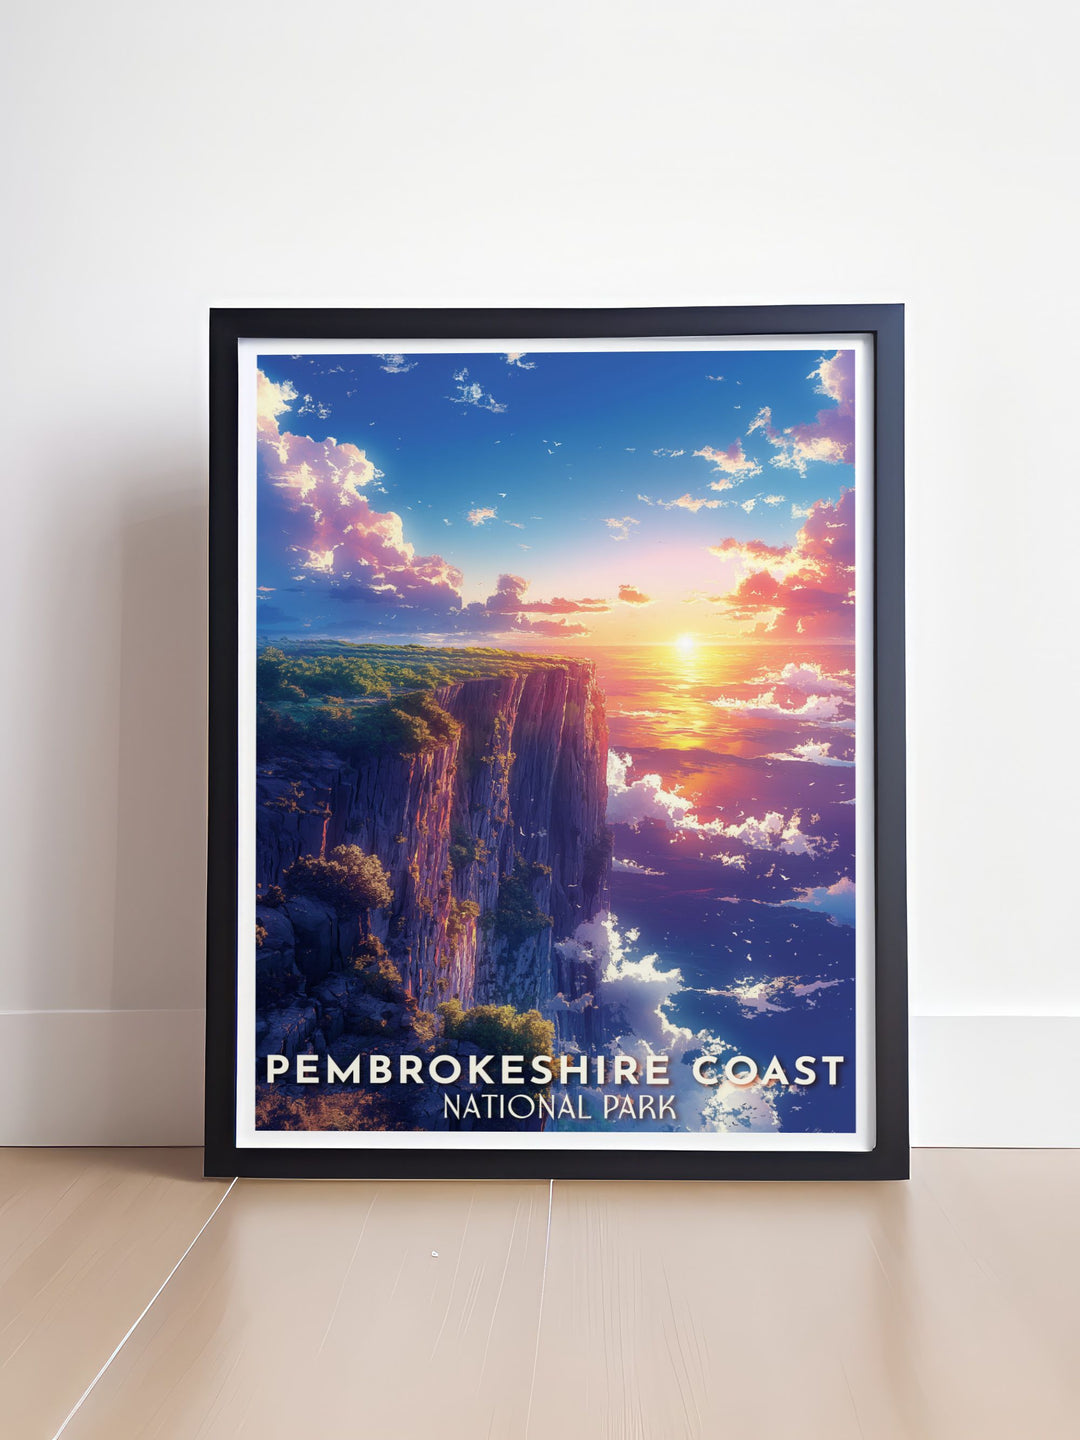 Celebrate the historical significance of the Pembrokeshire Coast with this travel poster, depicting the ancient ruins and cultural landmarks that highlight Wales rich heritage.